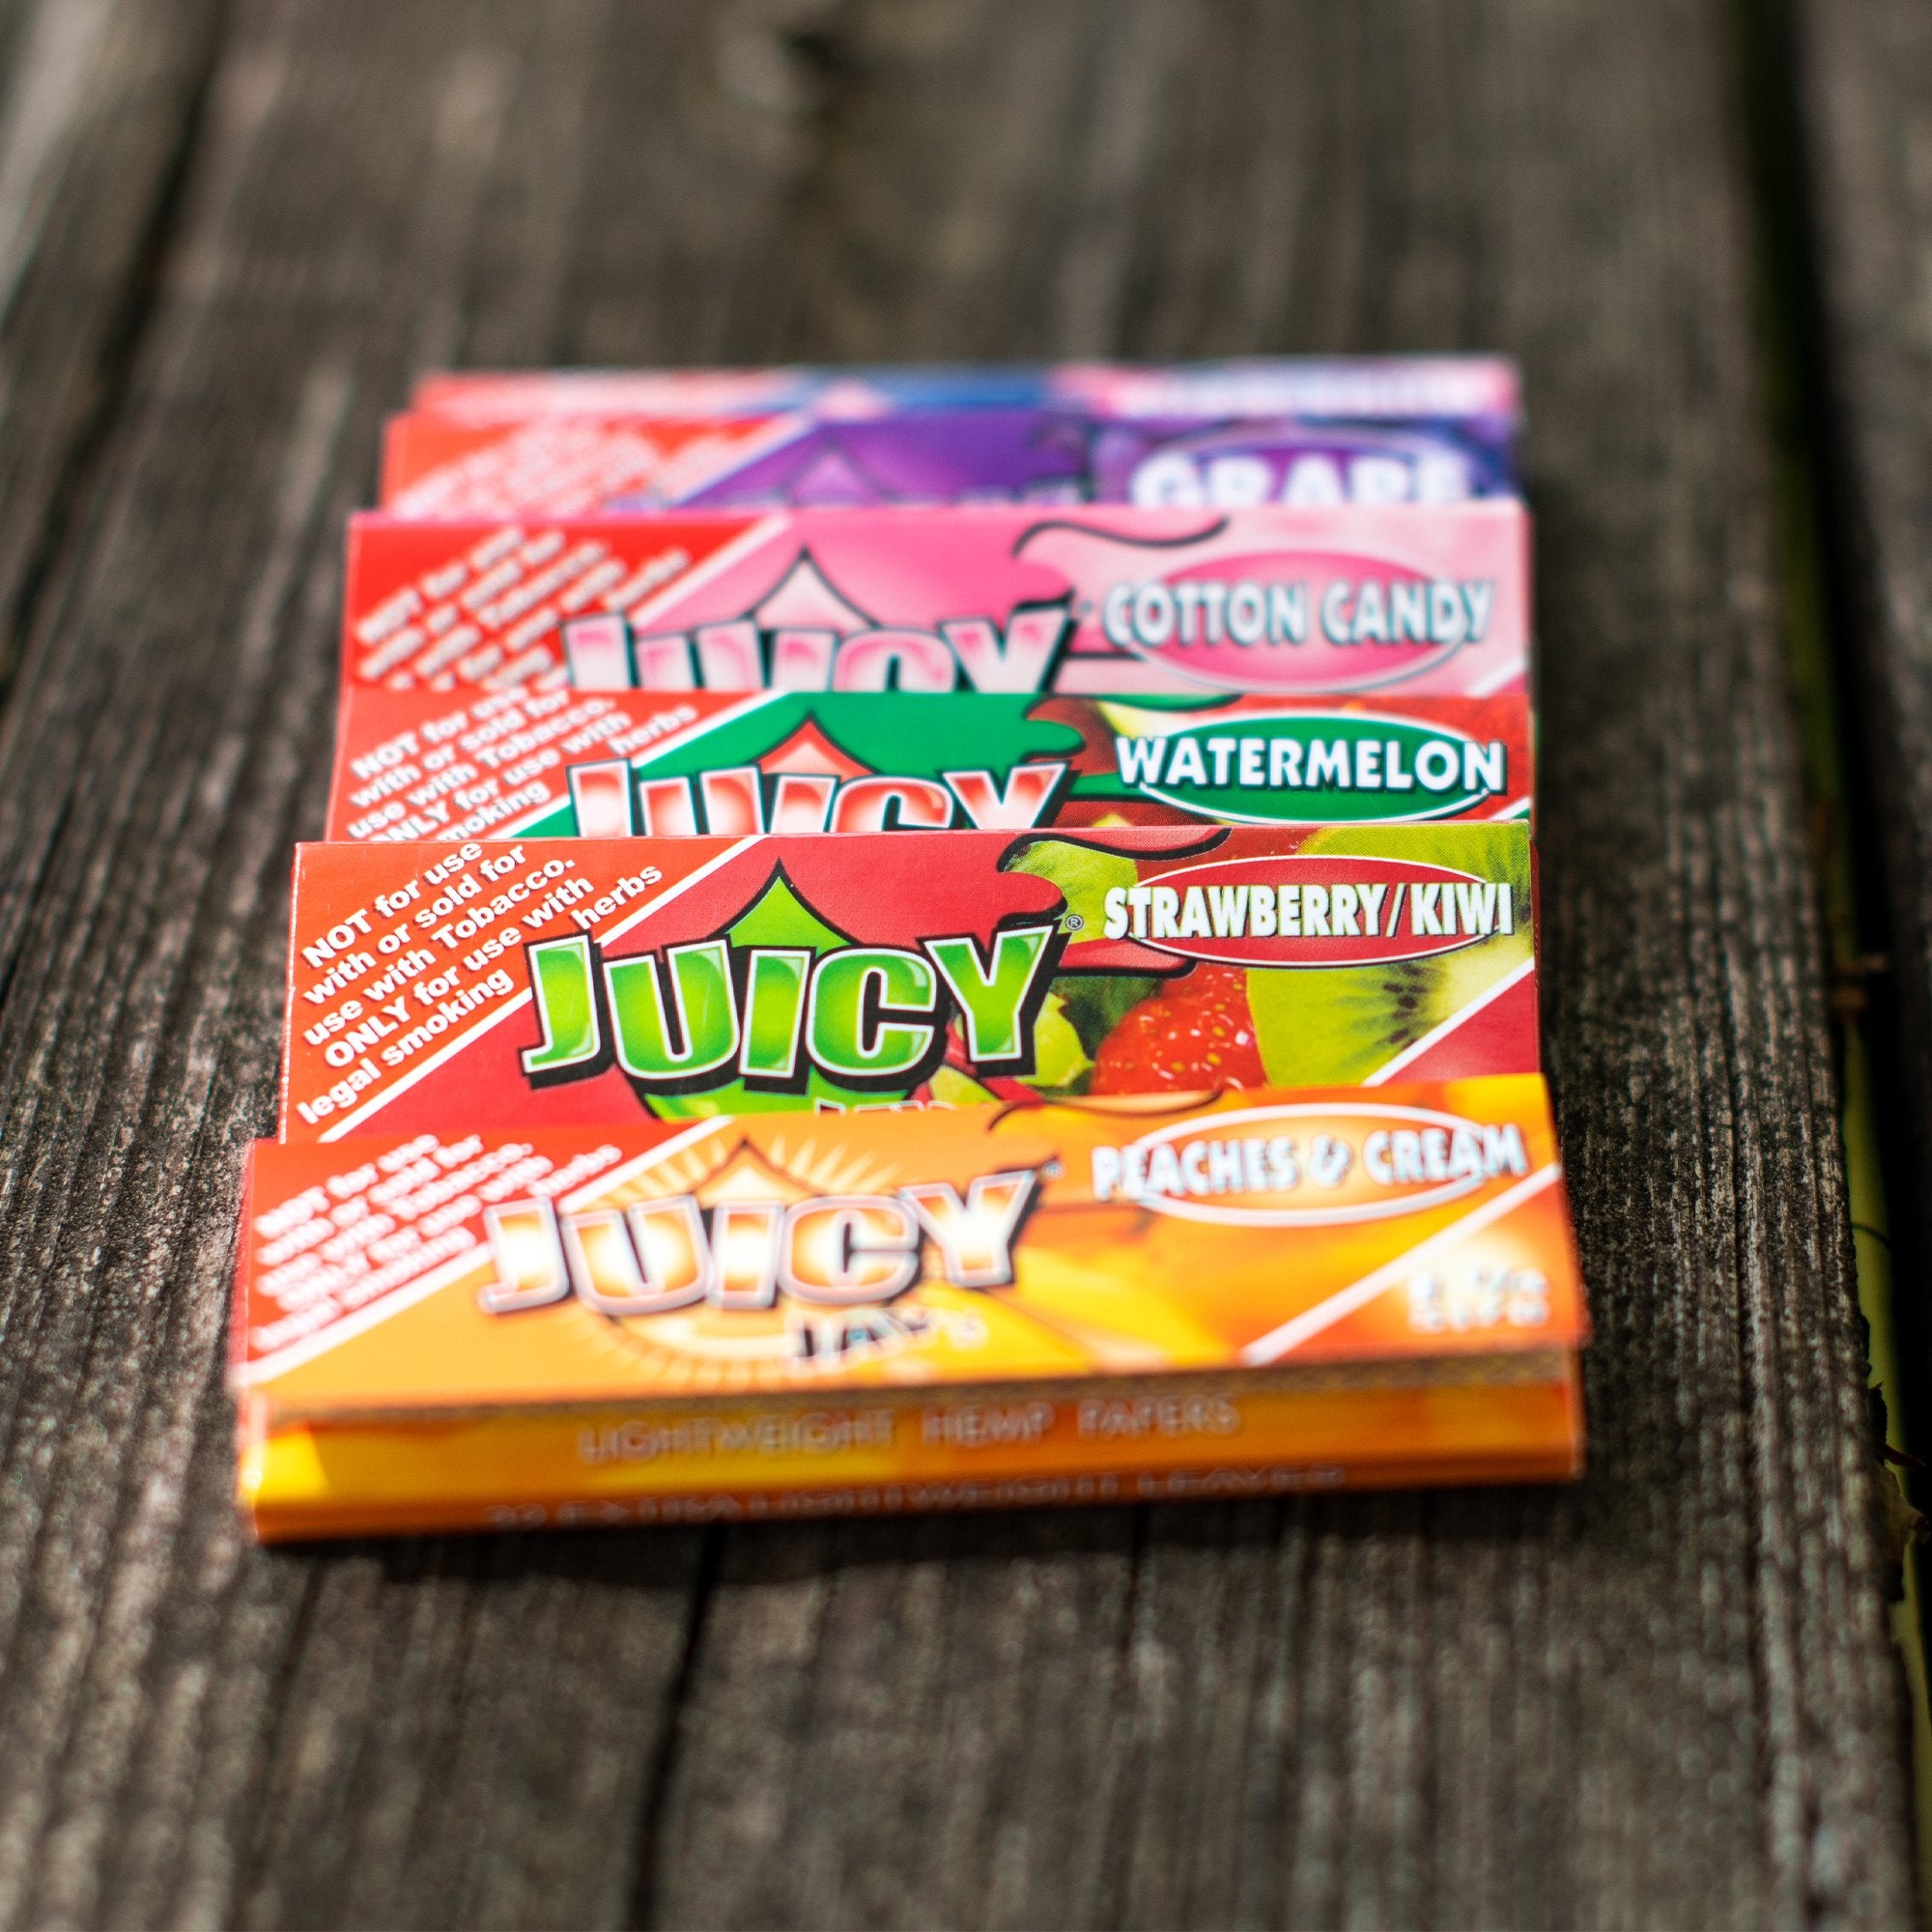 Juicy Jays Cotton Candy Papers 1 1/4